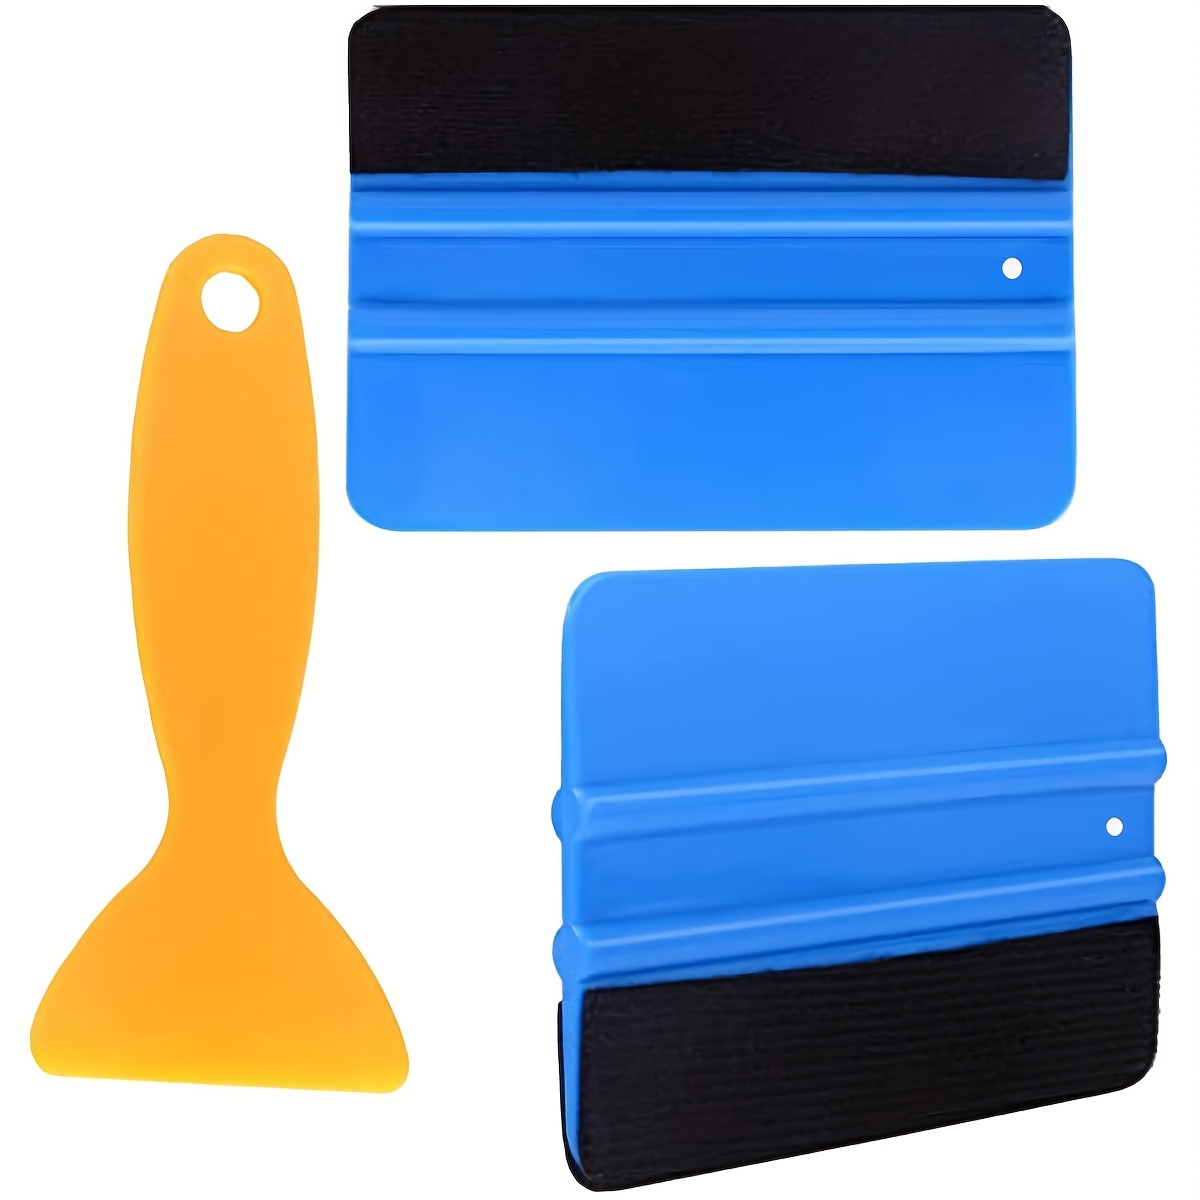 3M Squeegee for Vinyl Graphics Installation